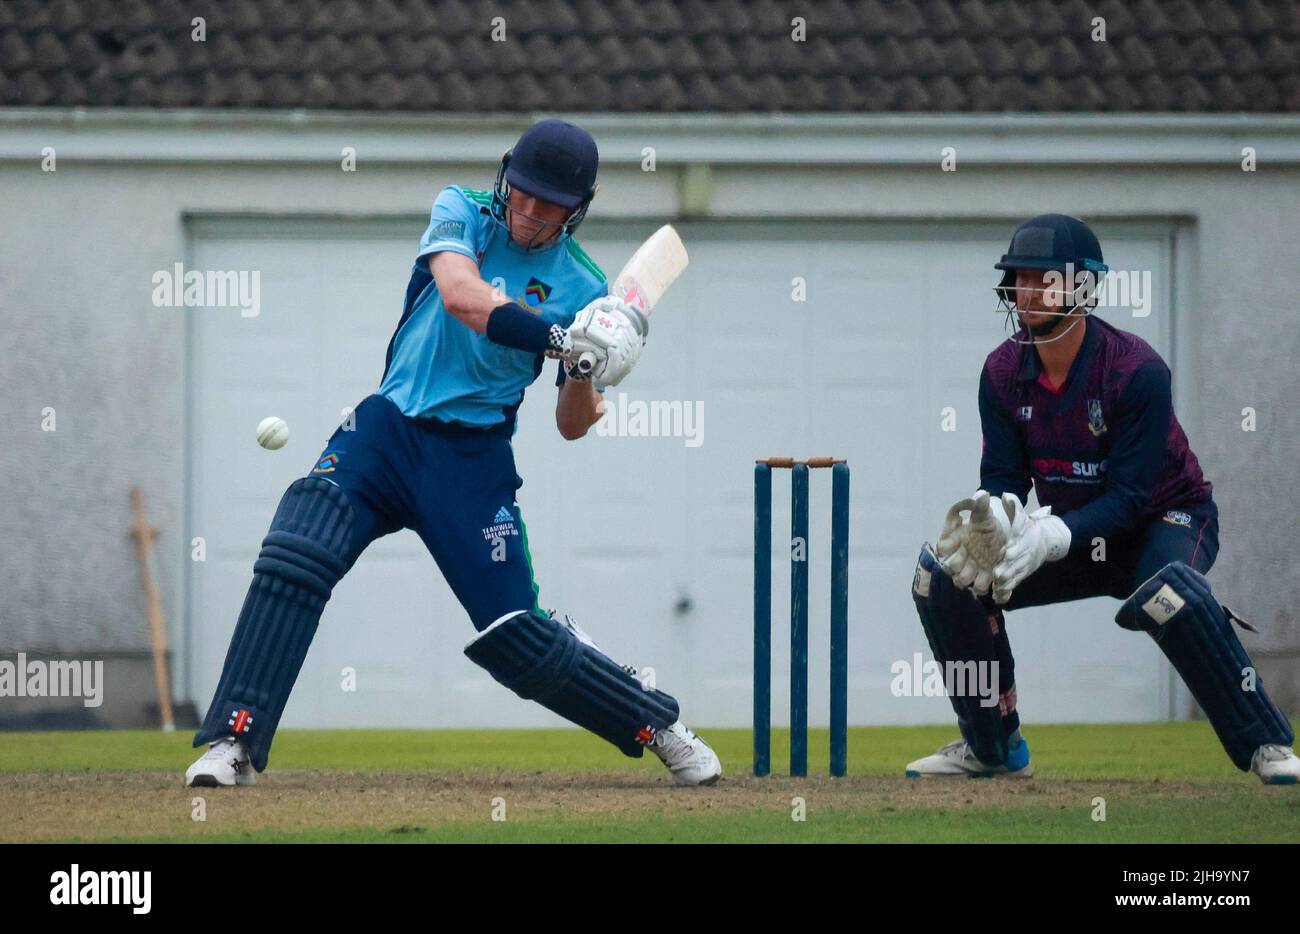 The Lawn, Waringstown, Northern Ireland, UK. 16 Jul 2022. The Lagan Valley Steels Twenty 20 Cup Final 2022. CIYMS v CSNI – CIYMS won by 16 runs (DLS) in a rain-affected match. A CSNI batter in action at the final. Credit: David Hunter/Alamy Live News. Stock Photo